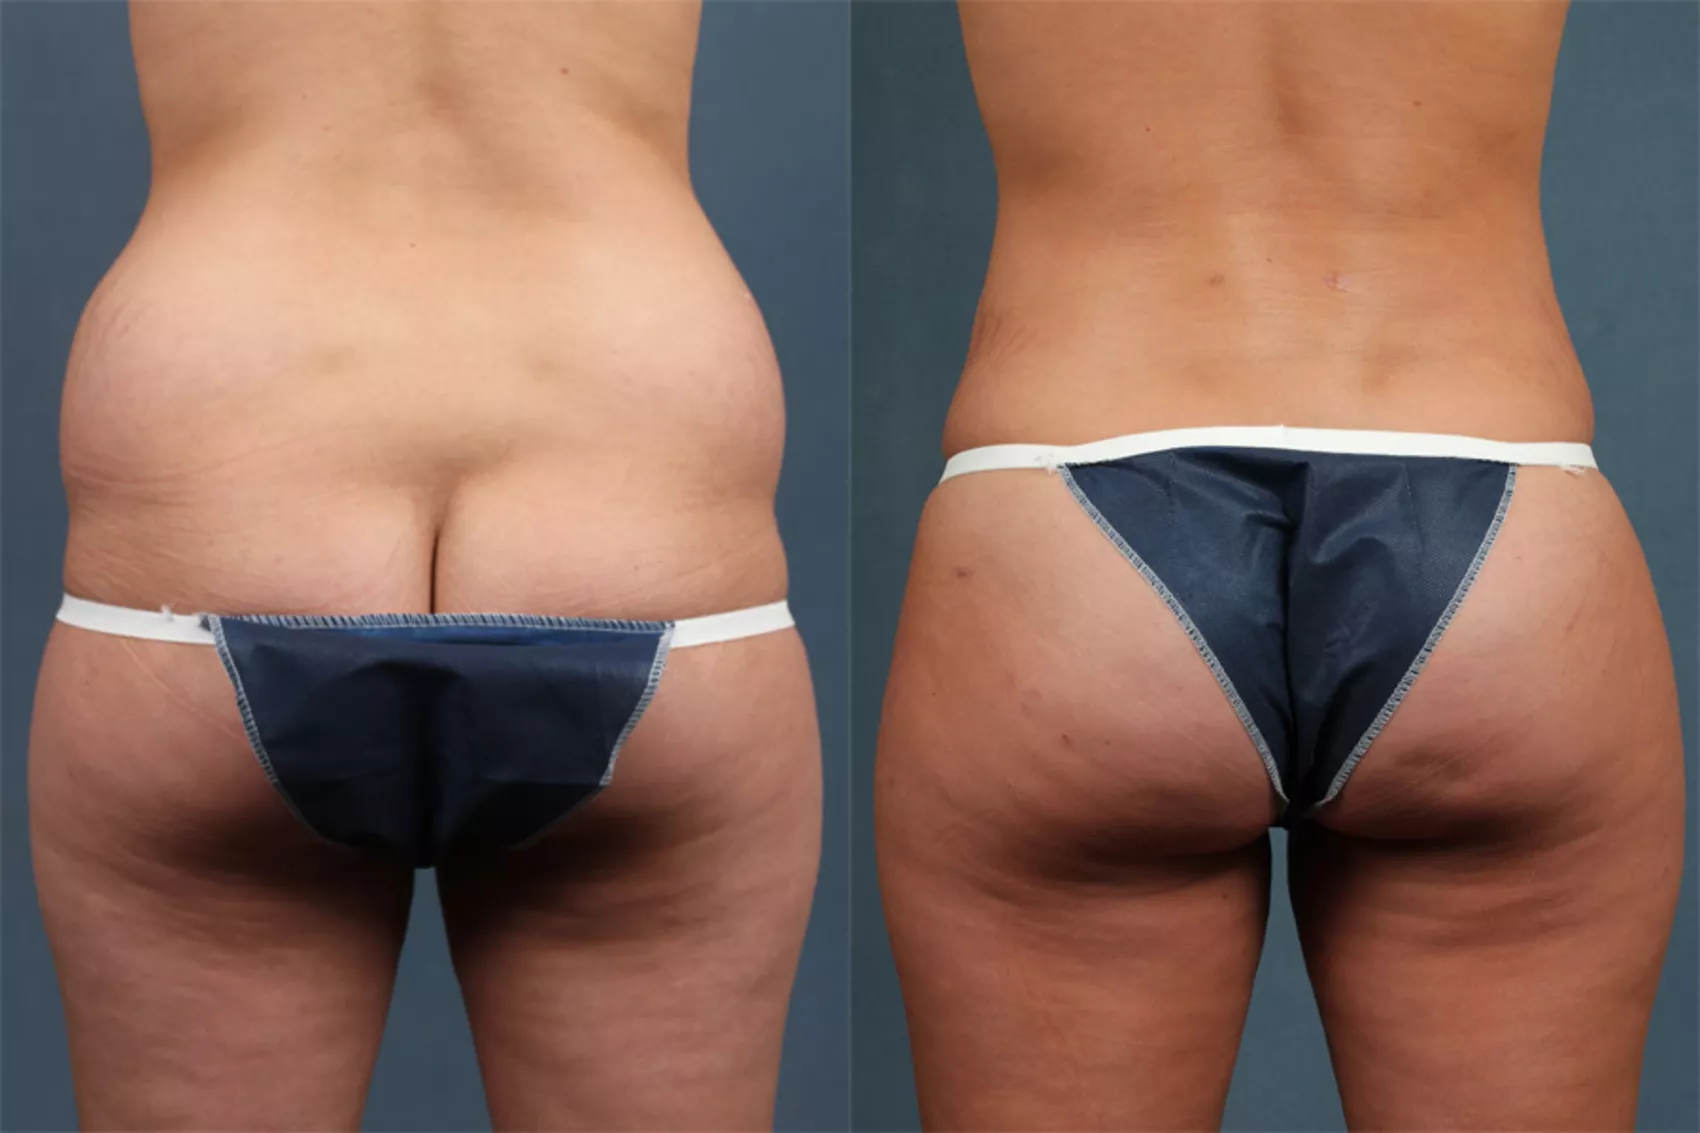 Breast and Buttock Augmentation Using Fat Grafting – The Full Overview